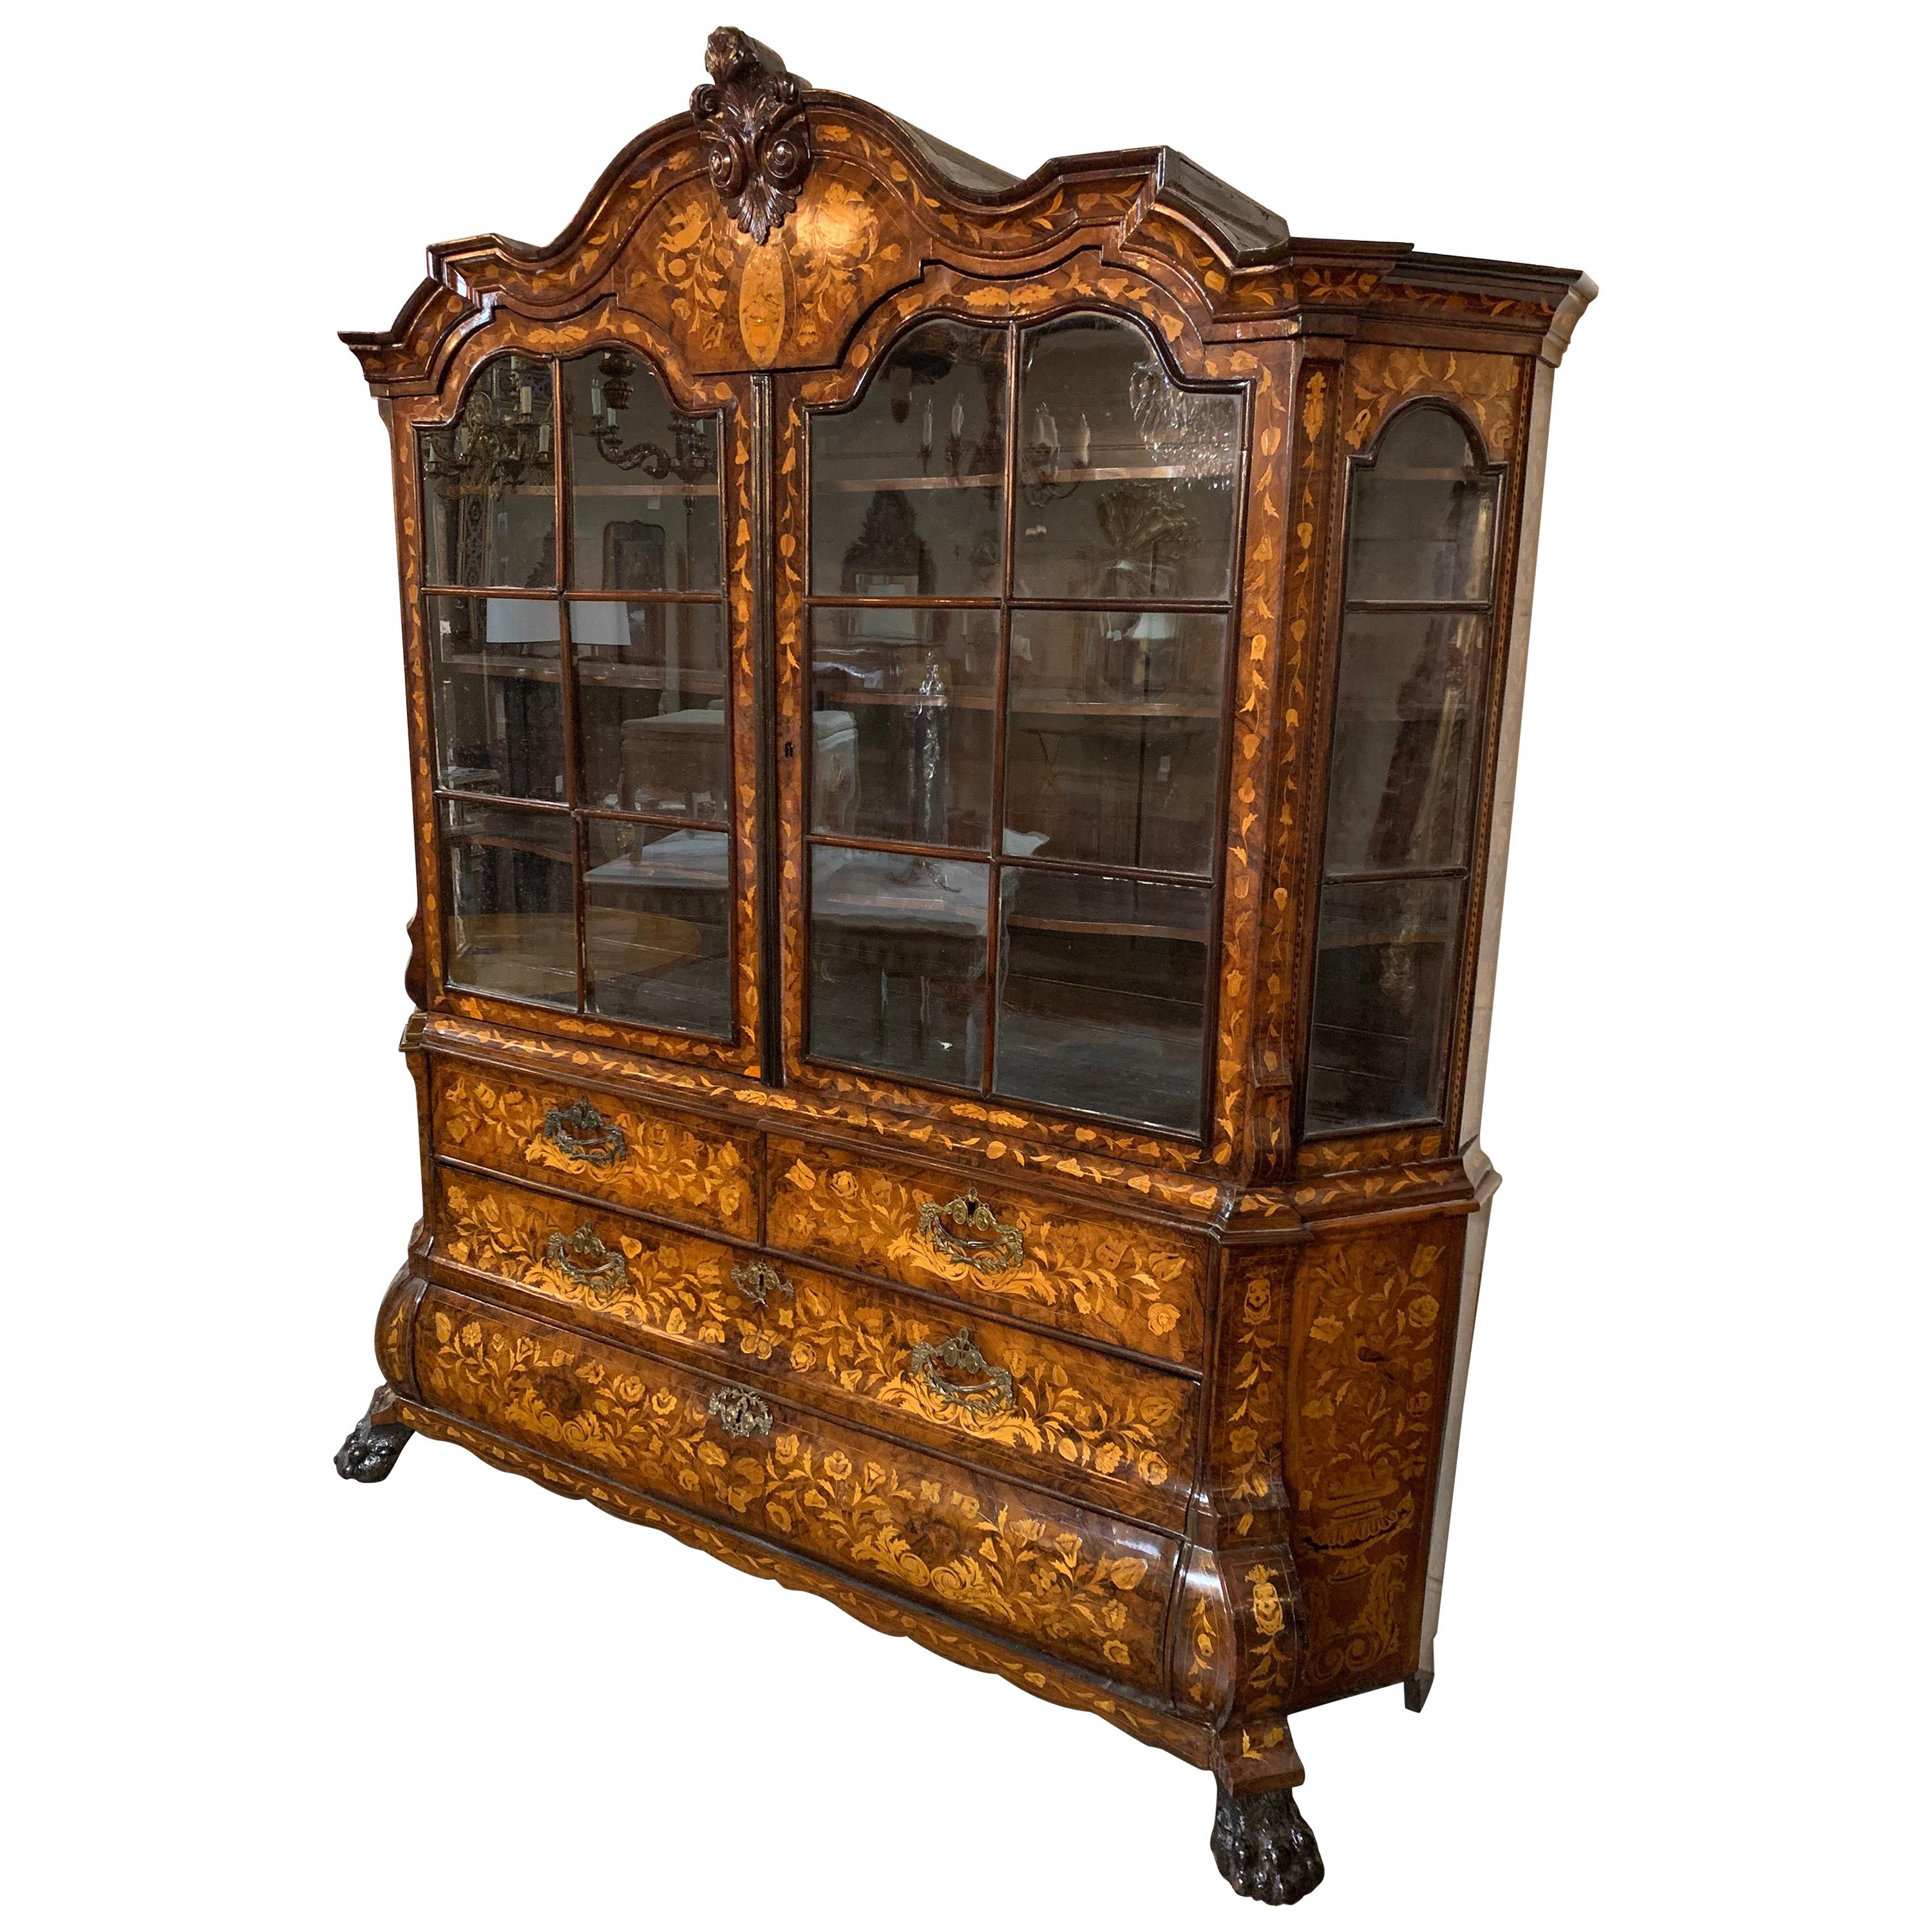 19th Century Dutch Carved Mahogany Display Cabinet with Marquetry Inlay